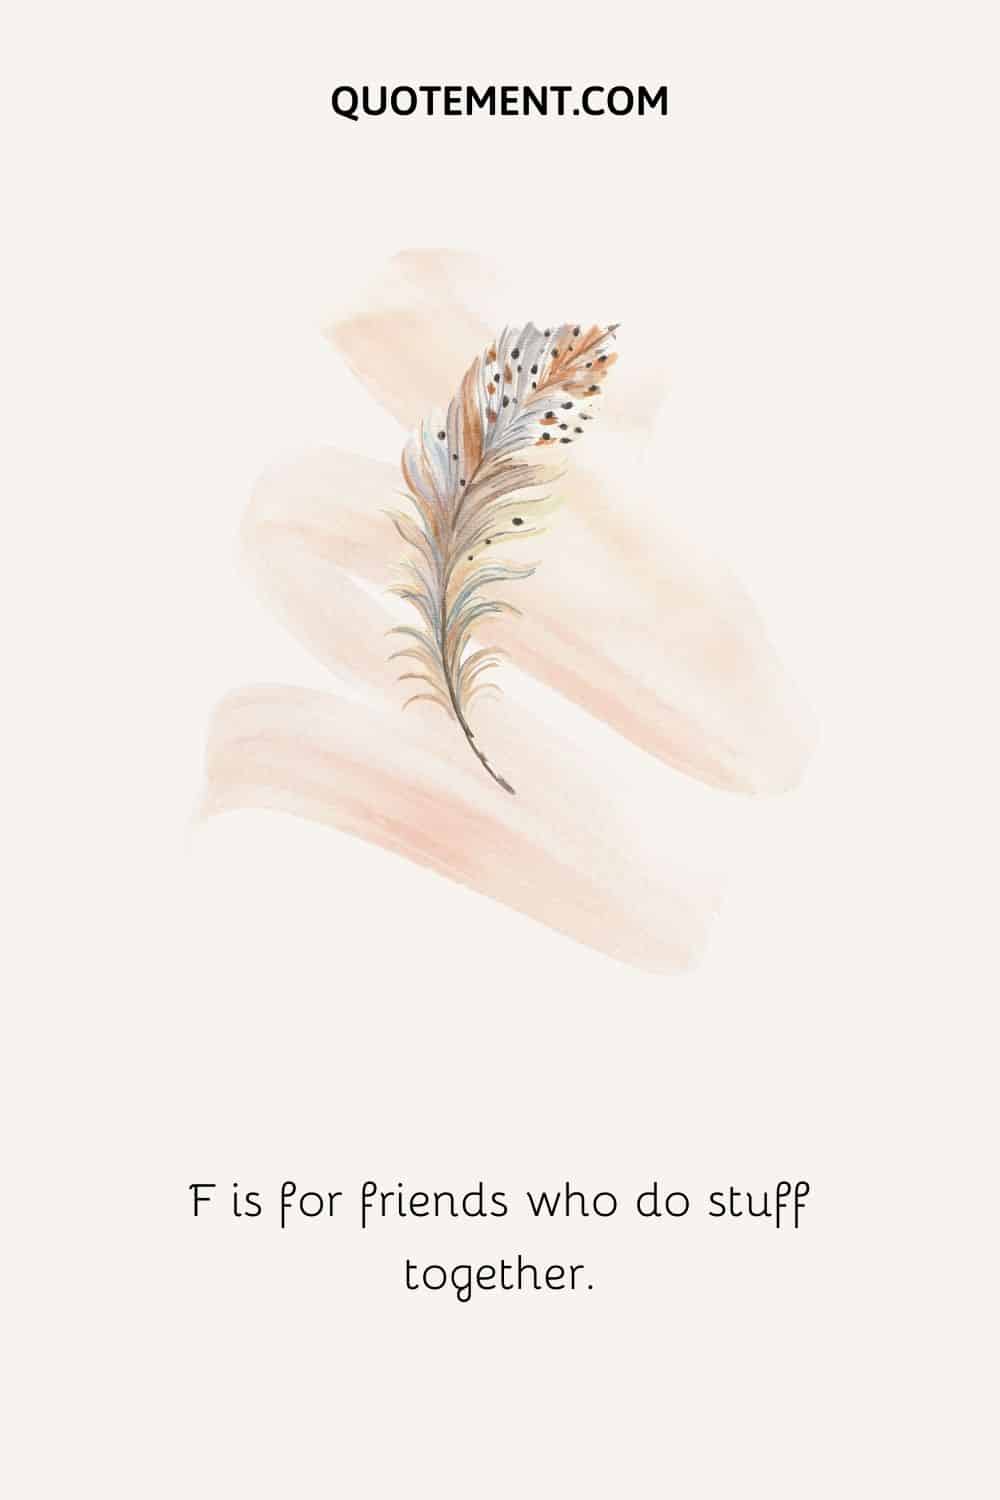 F is for friends who do stuff together.